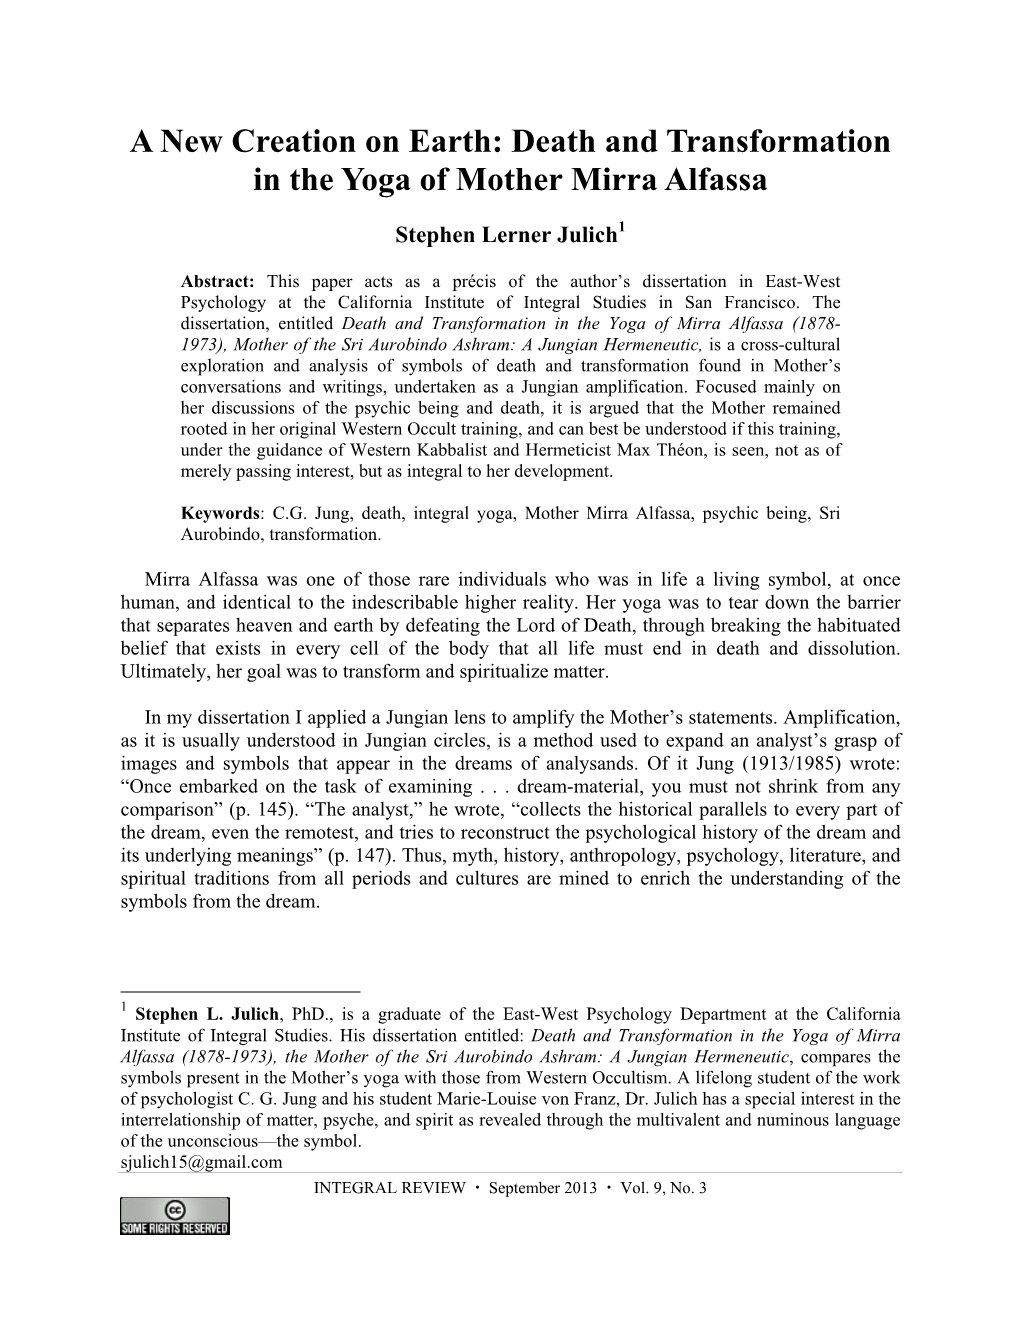 A New Creation on Earth: Death and Transformation in the Yoga of Mother Mirra Alfassa